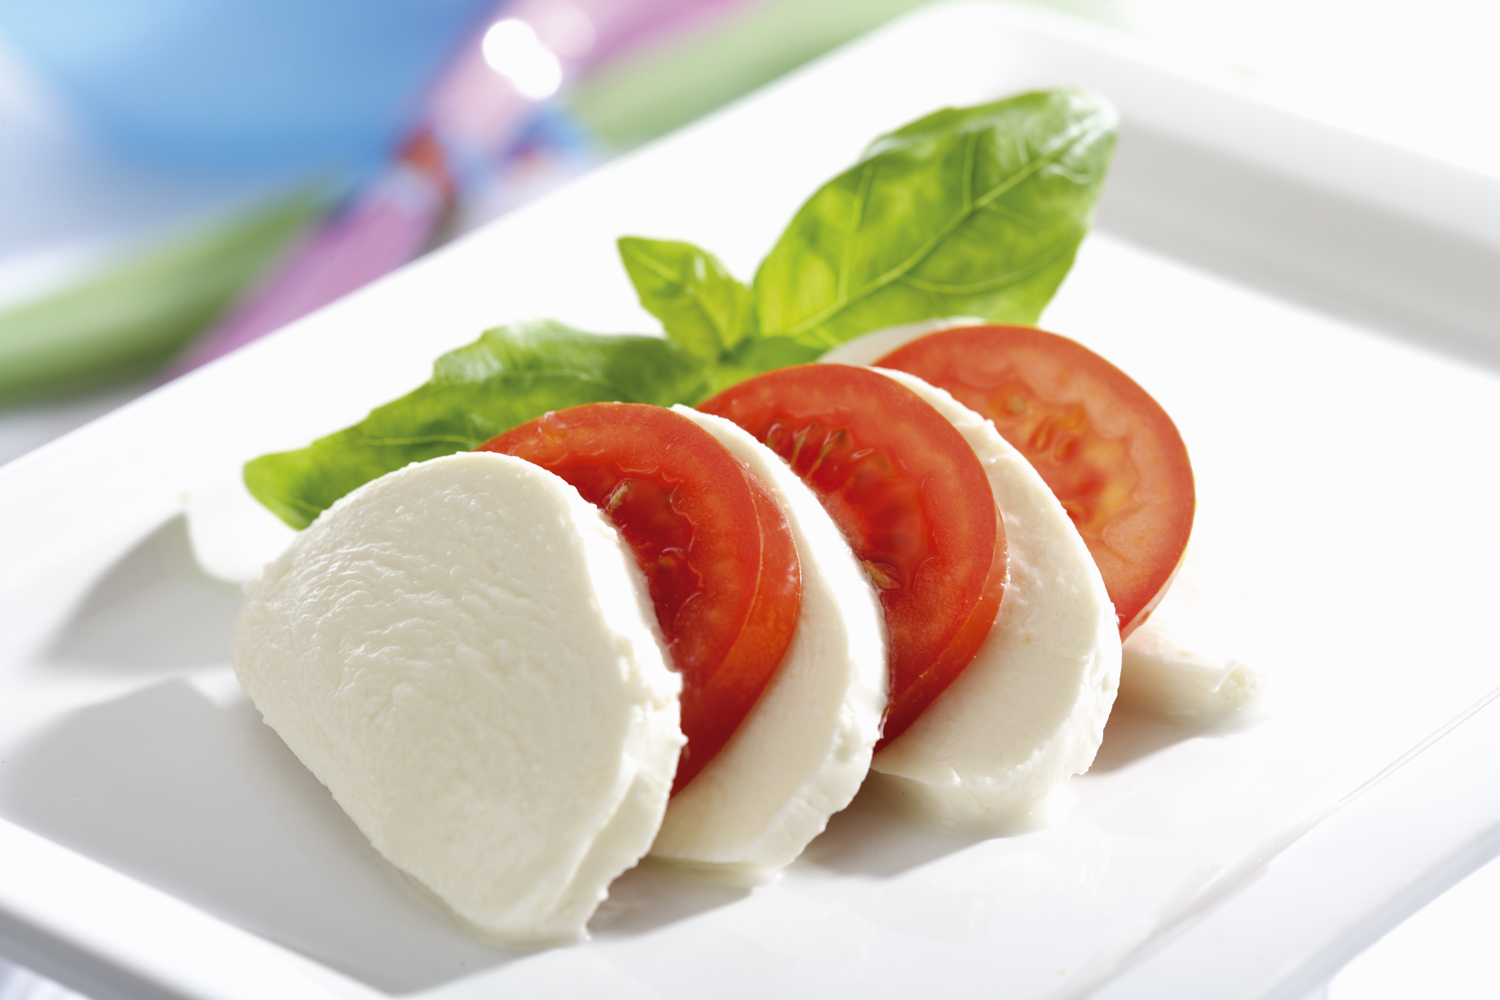 Mozzarella cheese slices with tomatoes and herbs on a plate